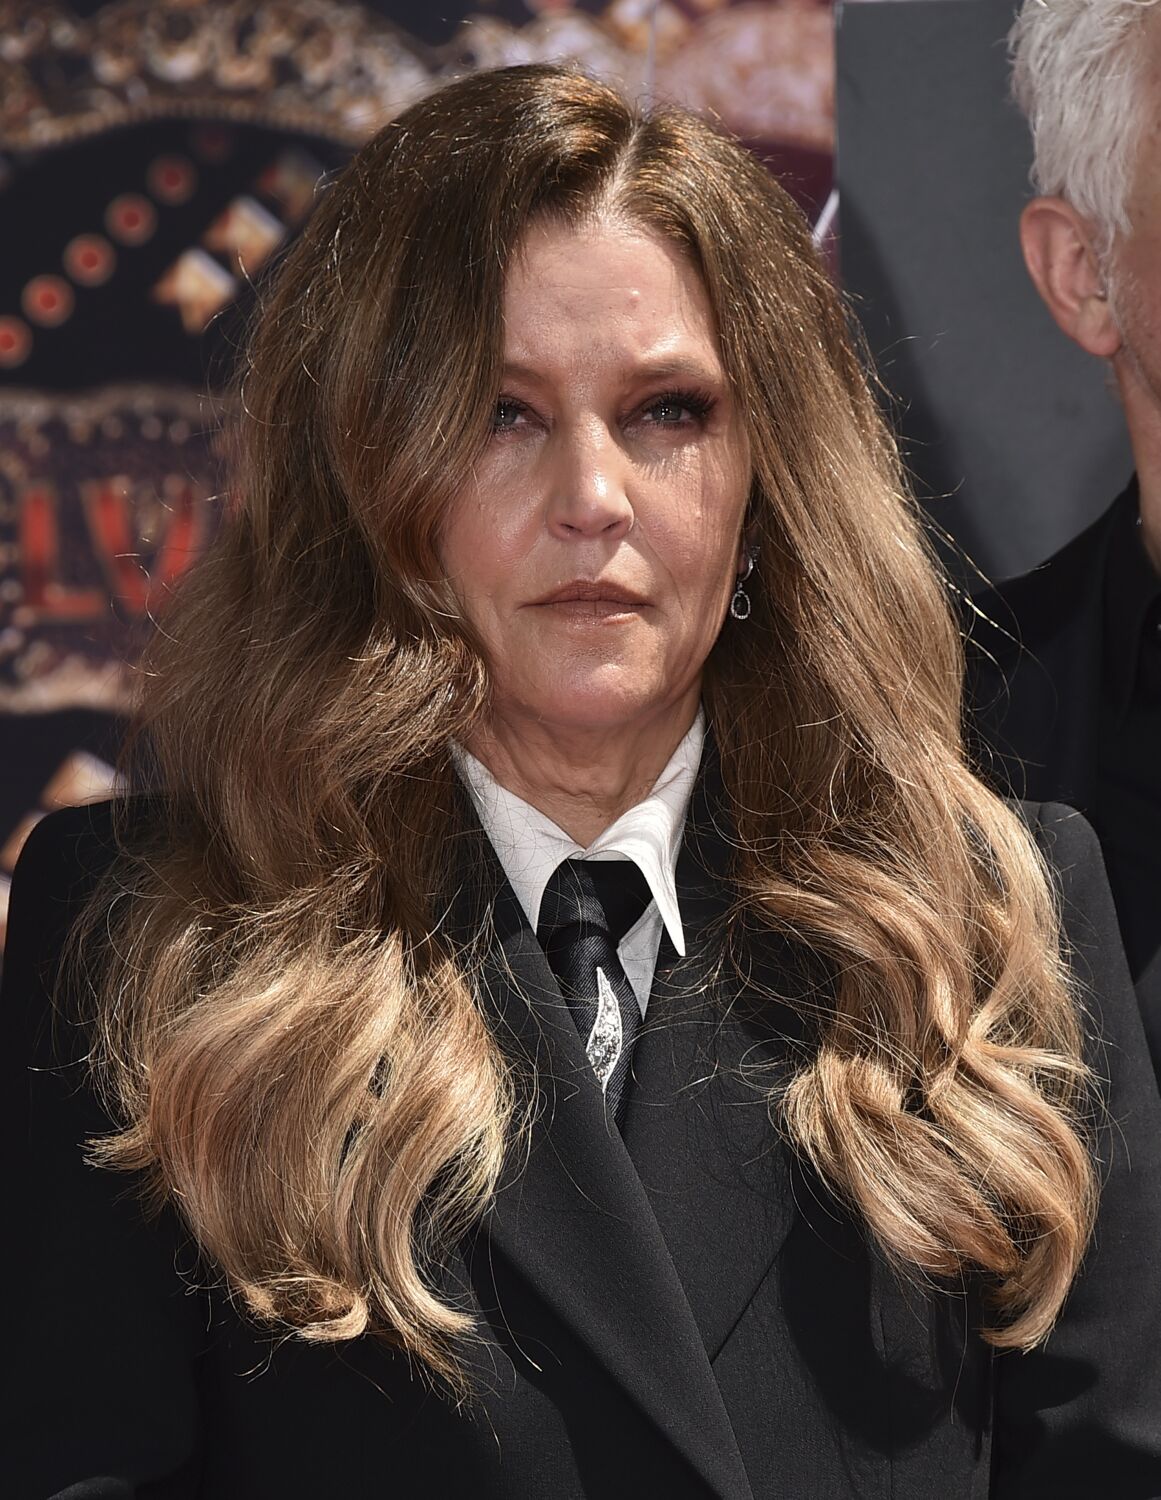 Lisa Marie Presley rushed to hospital after suffering cardiac arrest in Calabasas